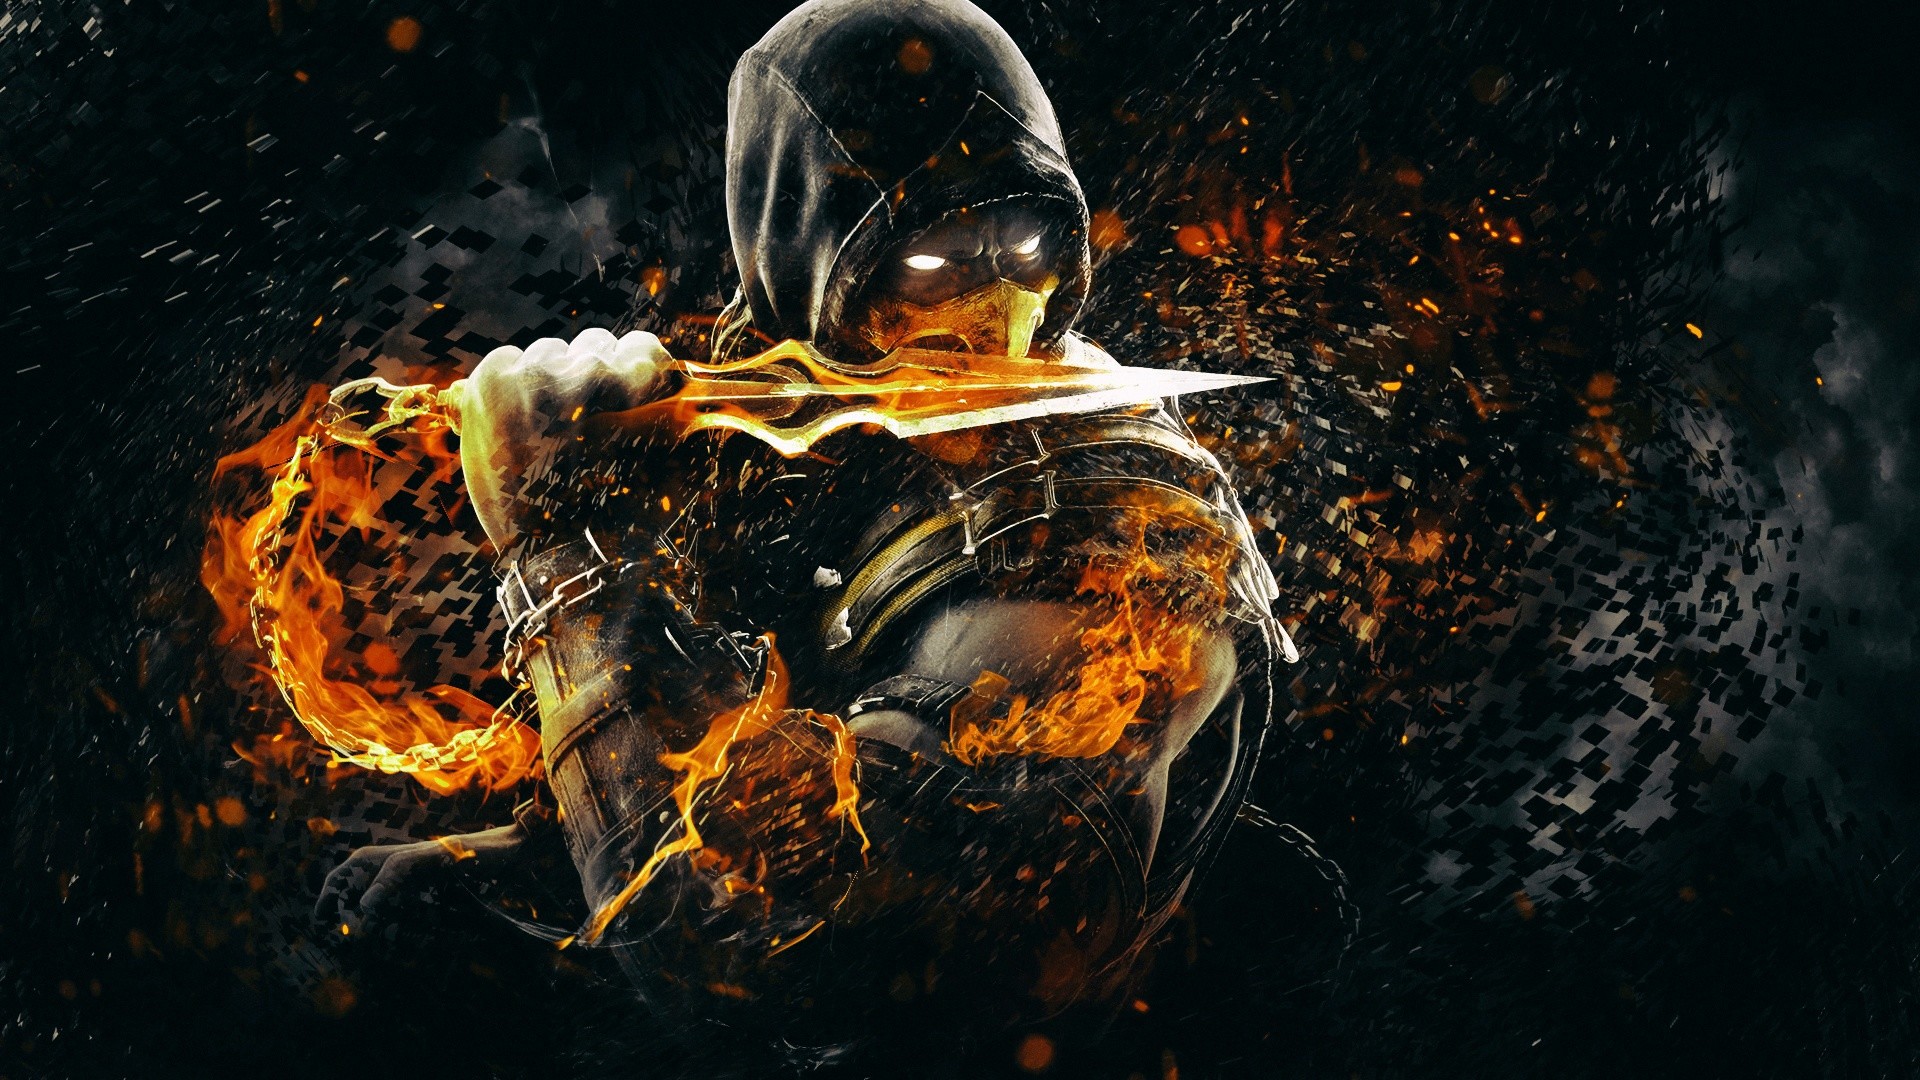 [1920×1080] Tremor From Mortal Kombat X Need #iPhone #6S #Plus #Wallpaper/  #Background for #IPhone6SPlus? Follow iPhone 6S Plus 3Wallpapers/ #Backg…